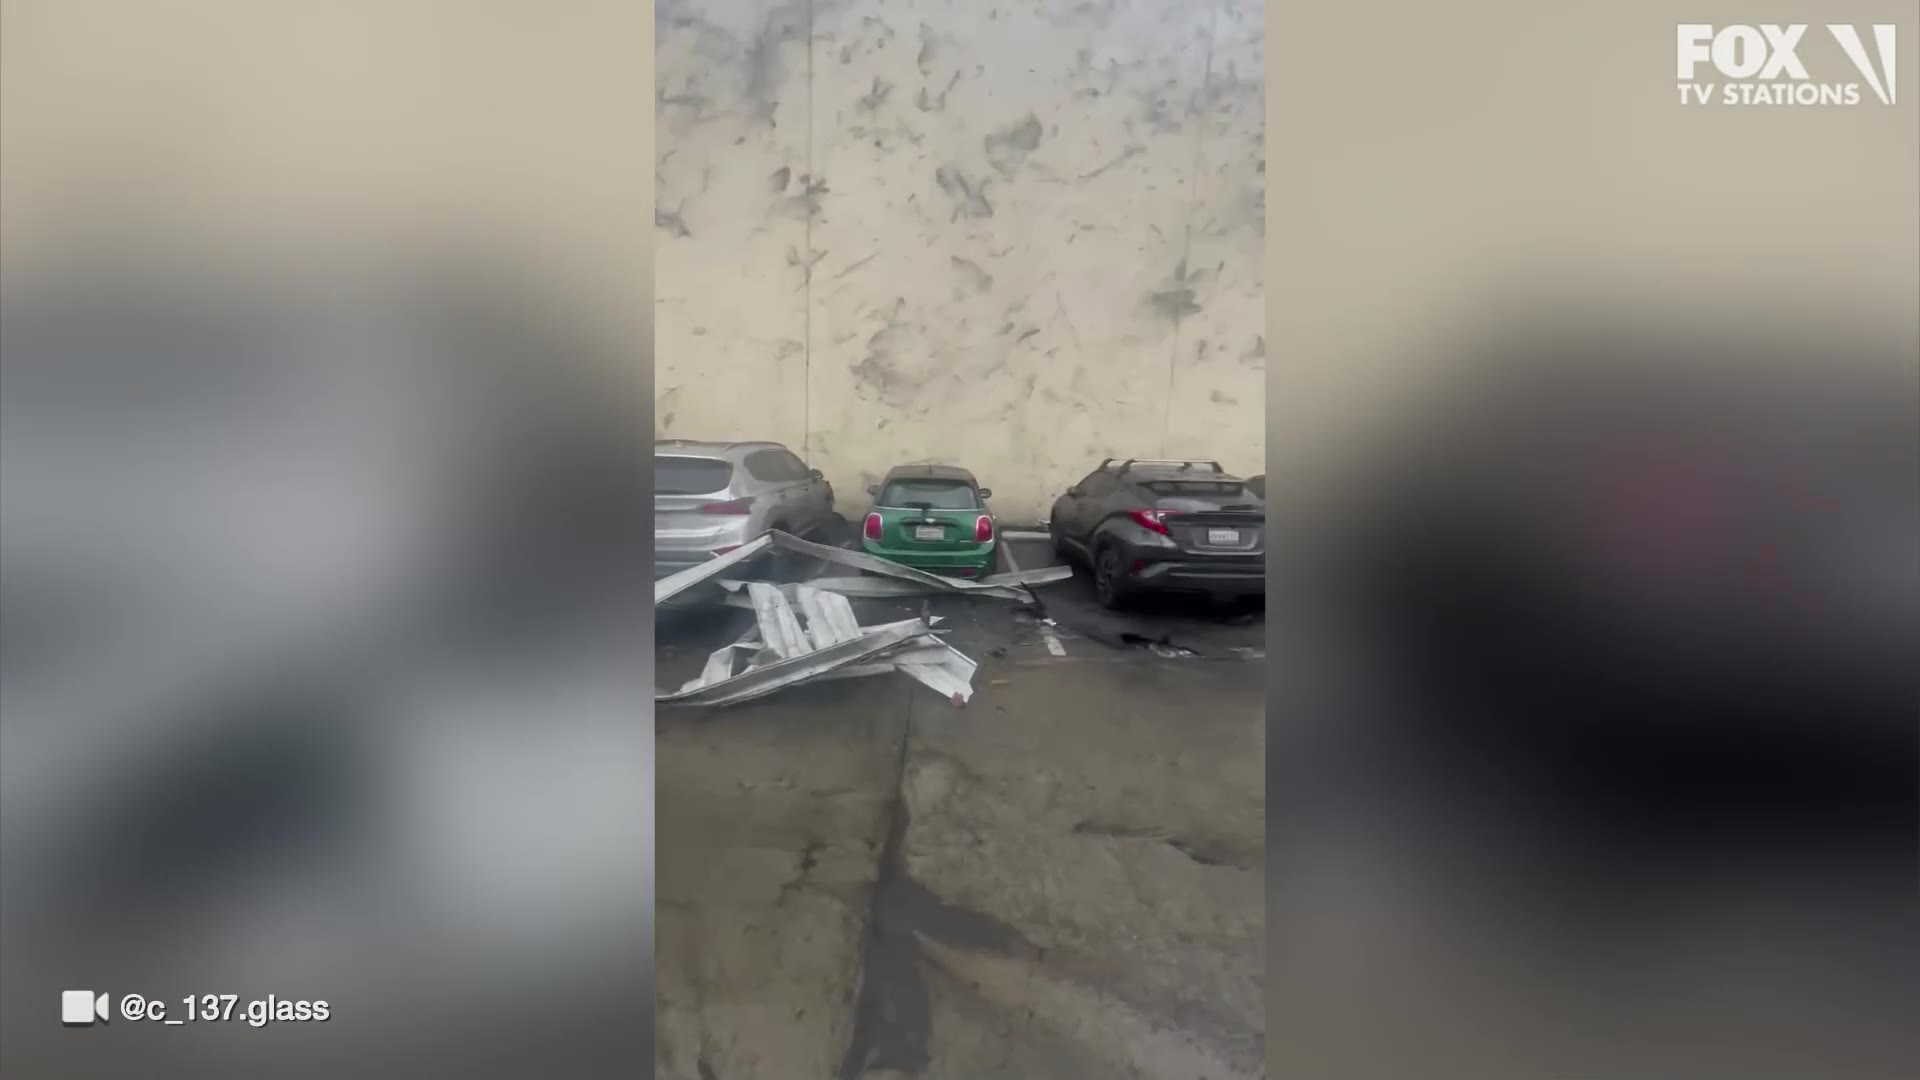 Video shows multiple cars damaged from potential tornado in Montebello